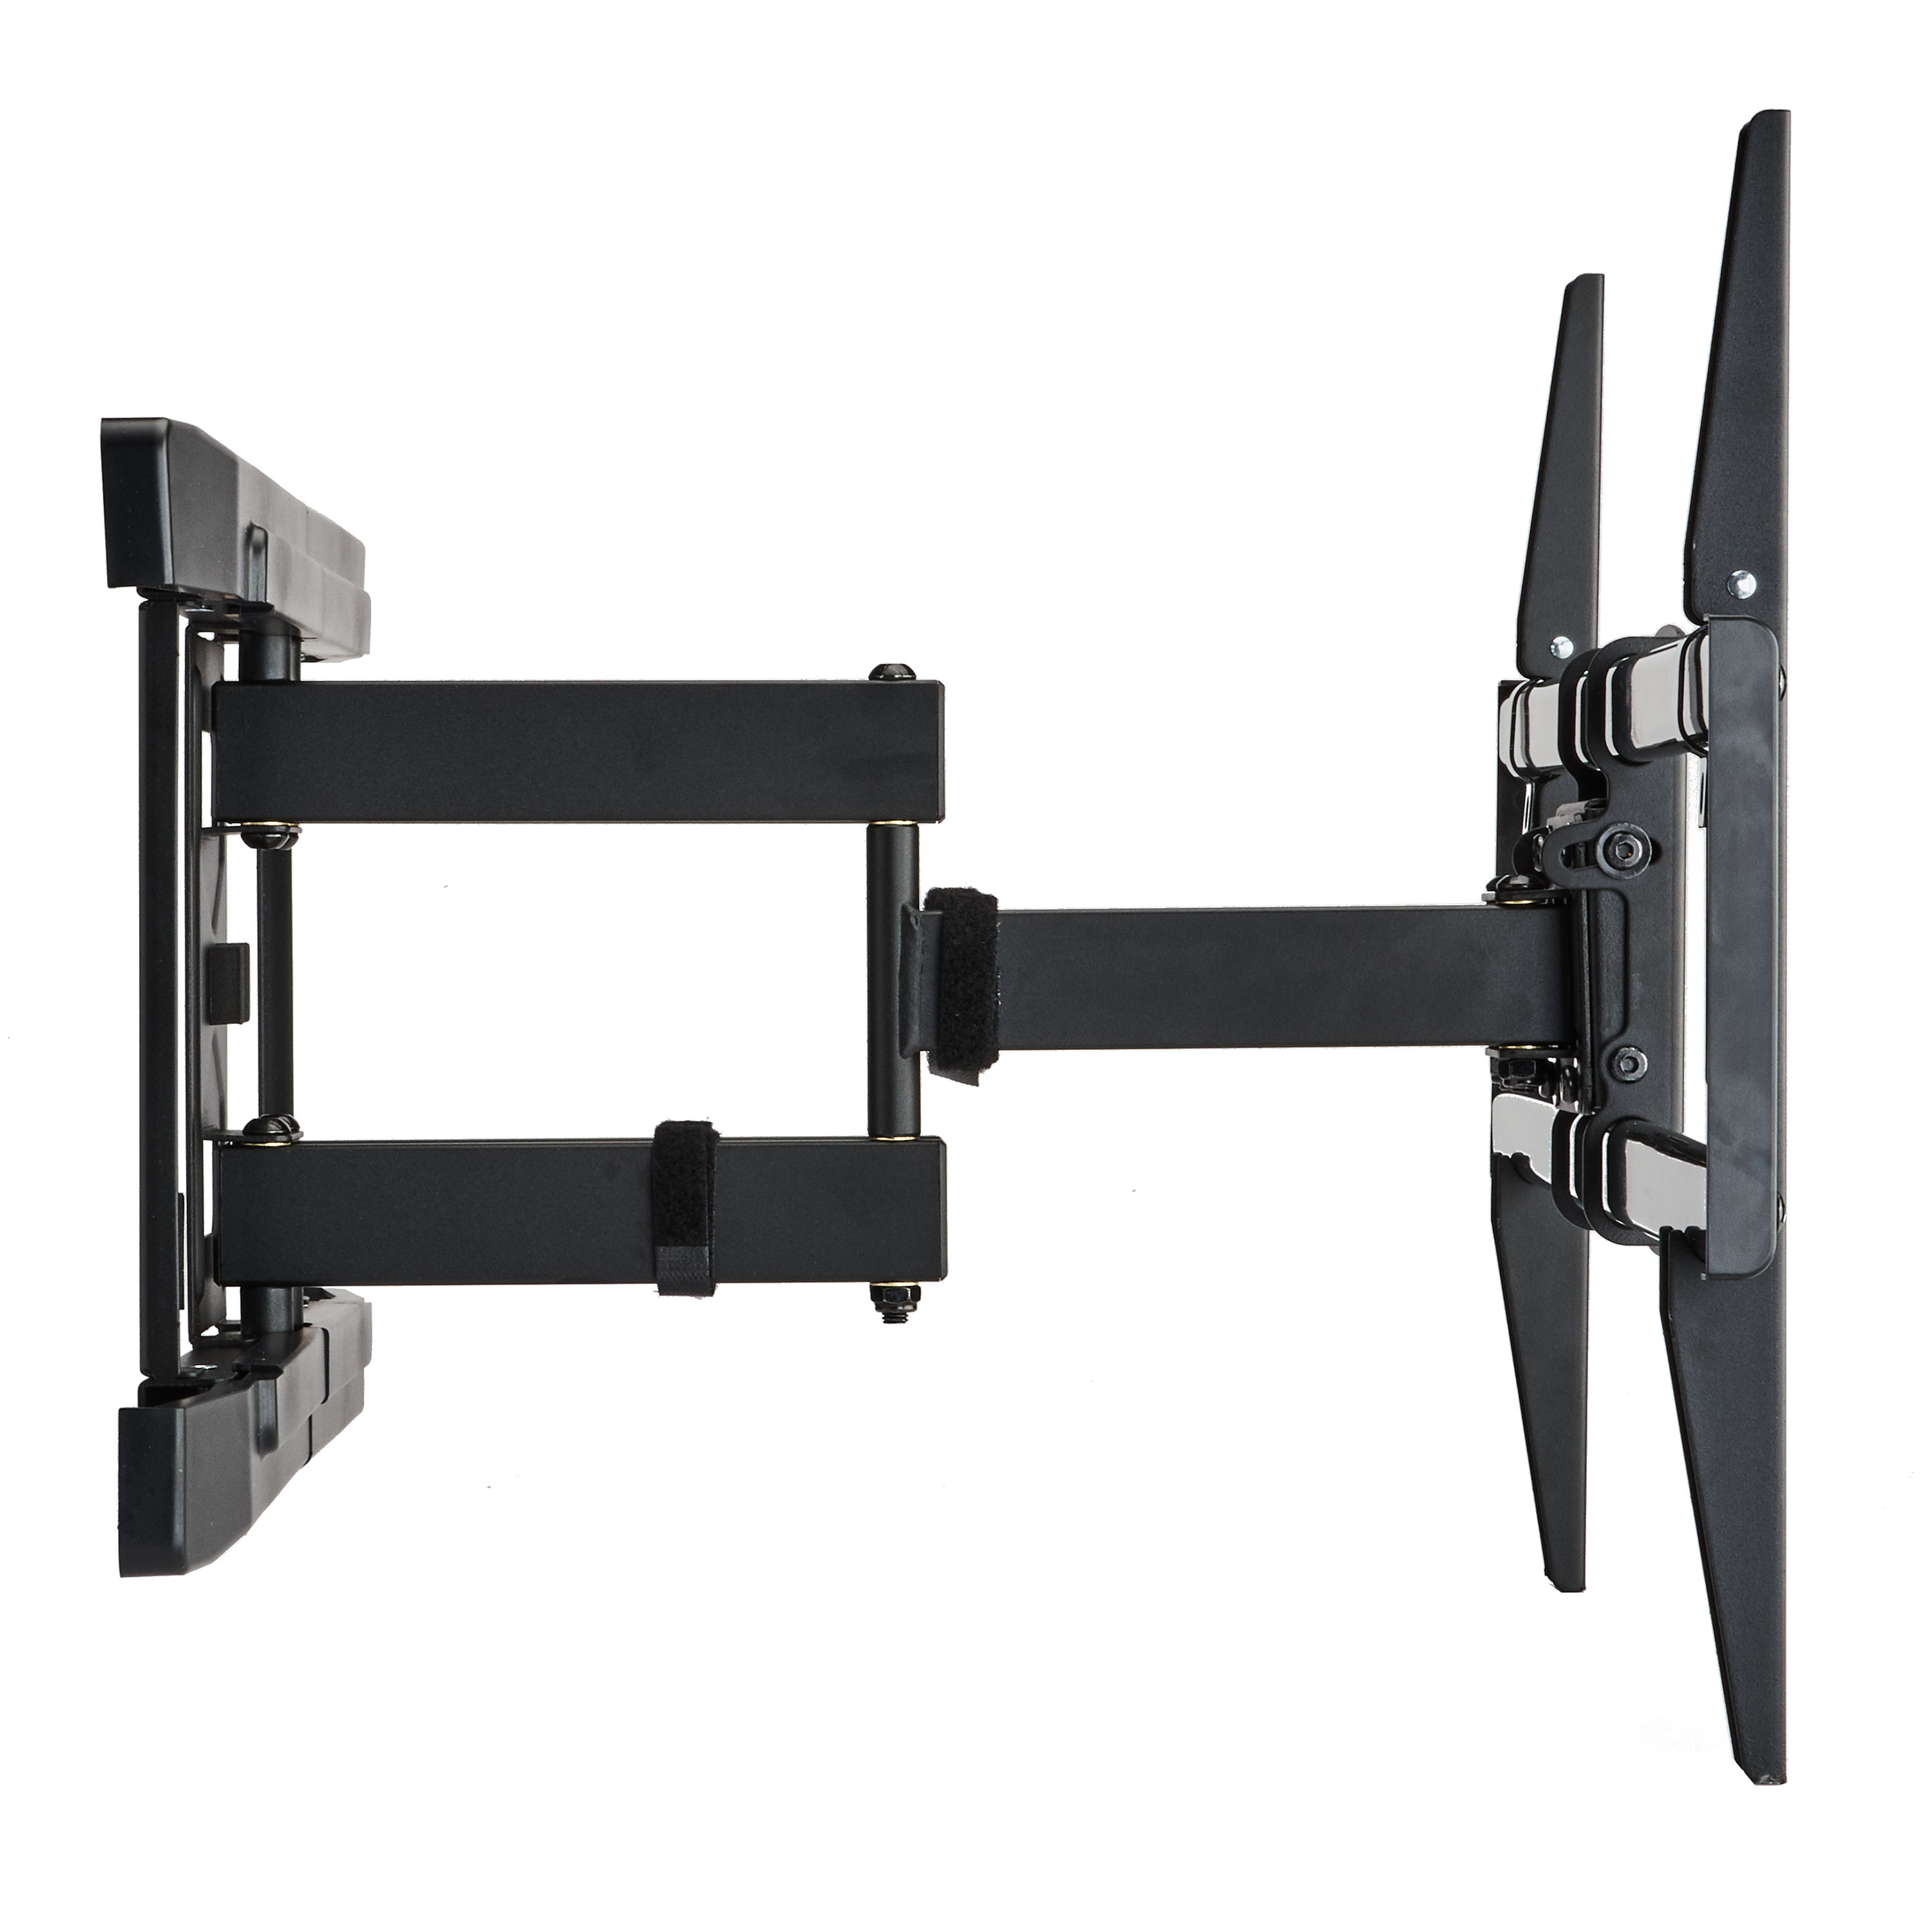 onn. Full Motion TV Wall Mount for TVs 47-84", Dual Swivel Articulating Arms - image 4 of 5